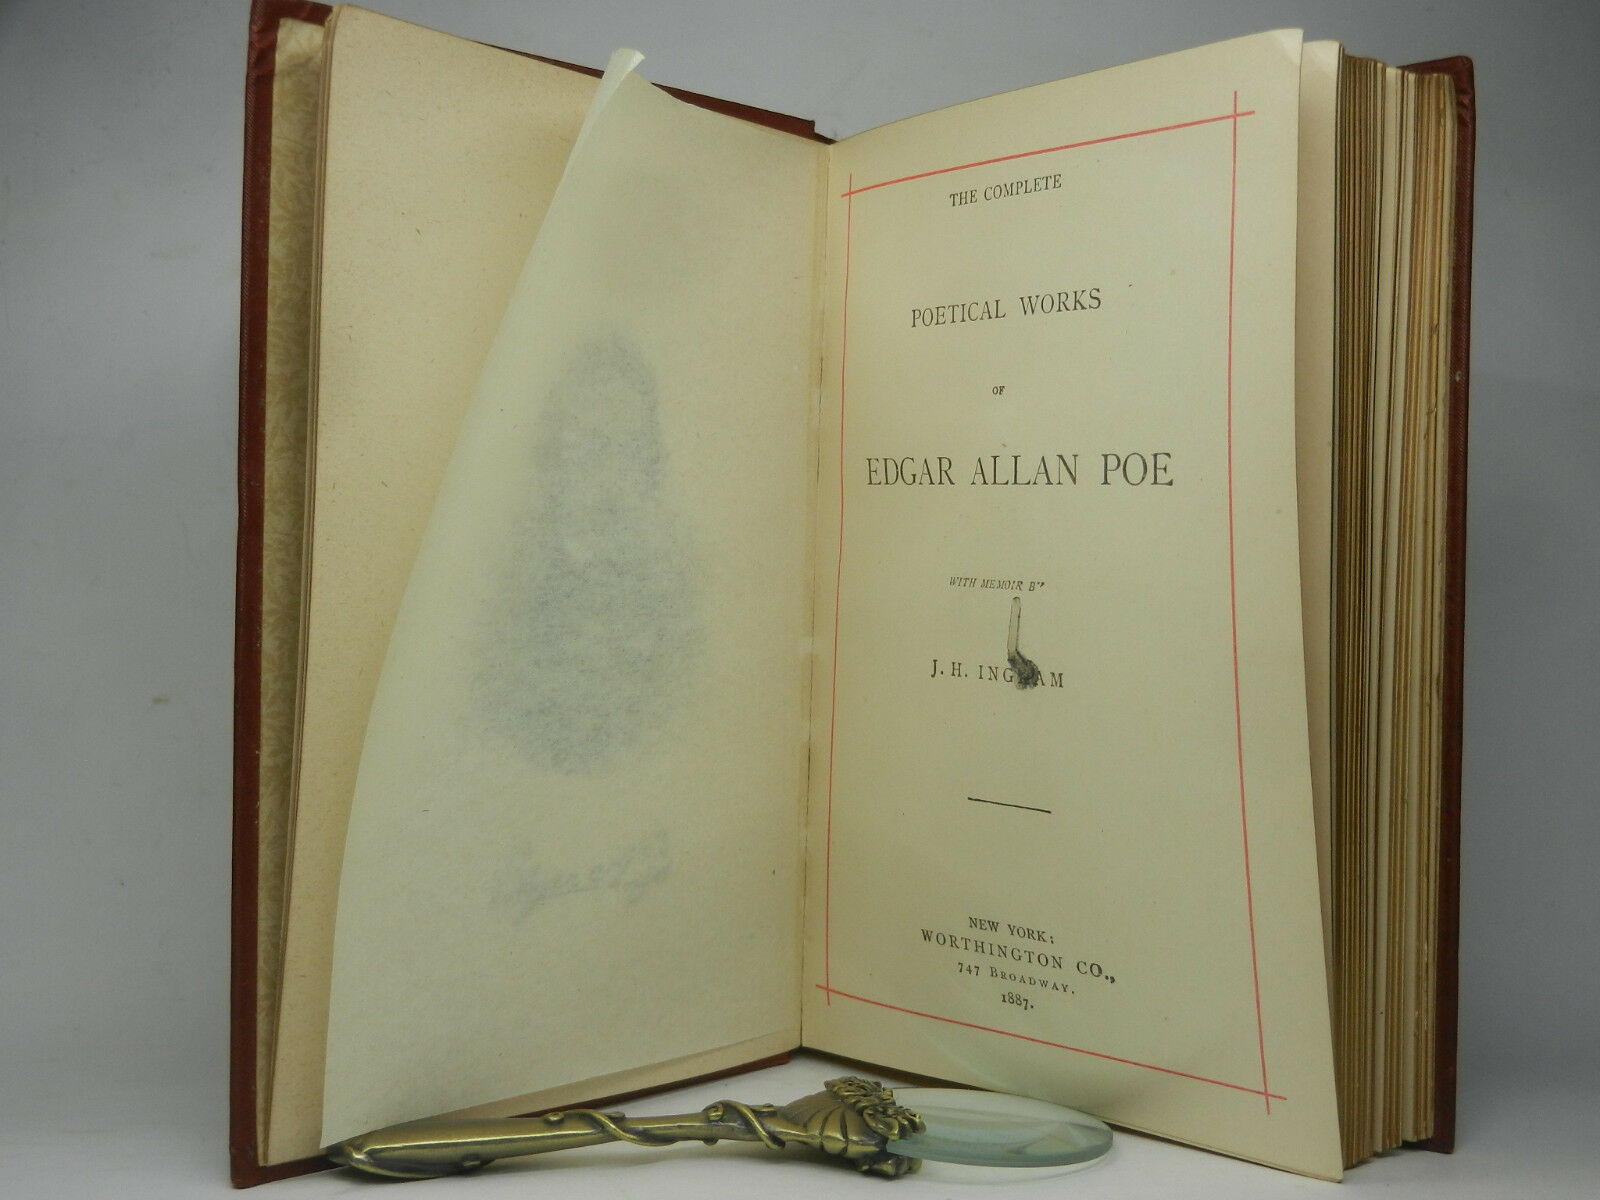 THE COMPLETE POETICAL WORKS OF EDGAR ALLAN POE 1887 Fine Decorative Cloth Covers